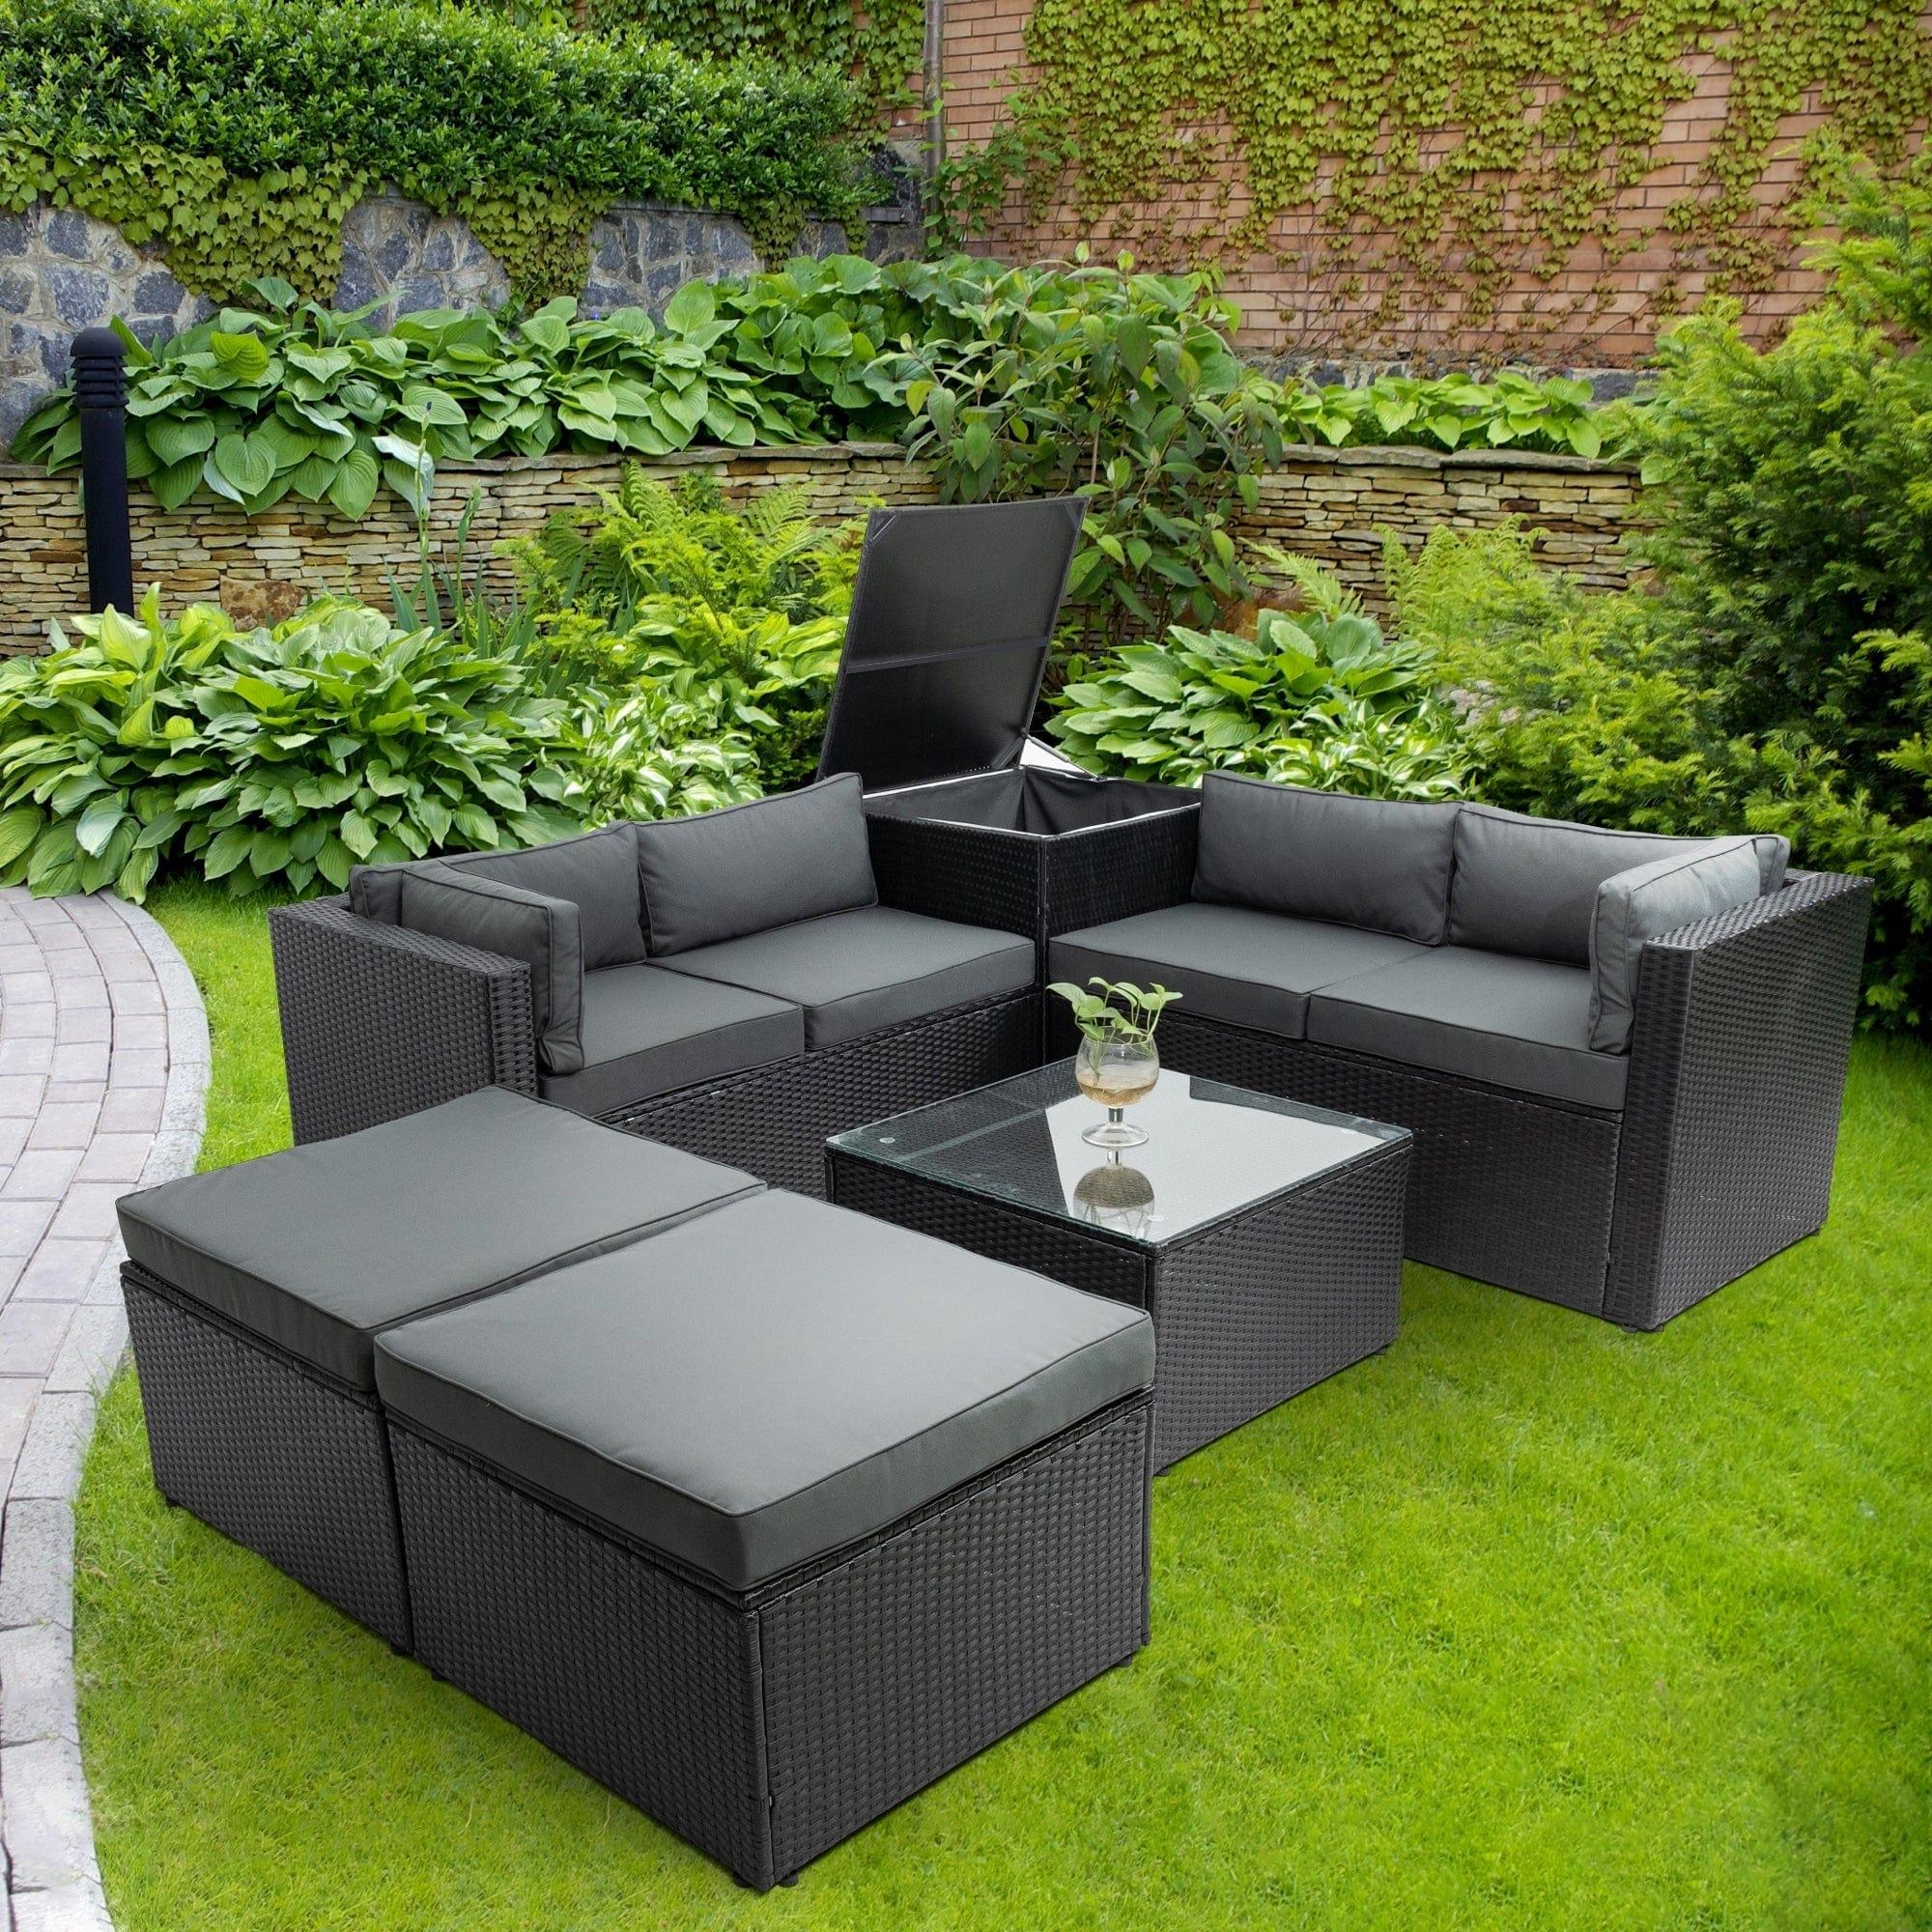 Shop 6 Piece Patio Rattan Wicker Outdoor Furniture Conversation Sofa Set with Storage Box Removeable Cushions and Temper glass TableTop Mademoiselle Home Decor